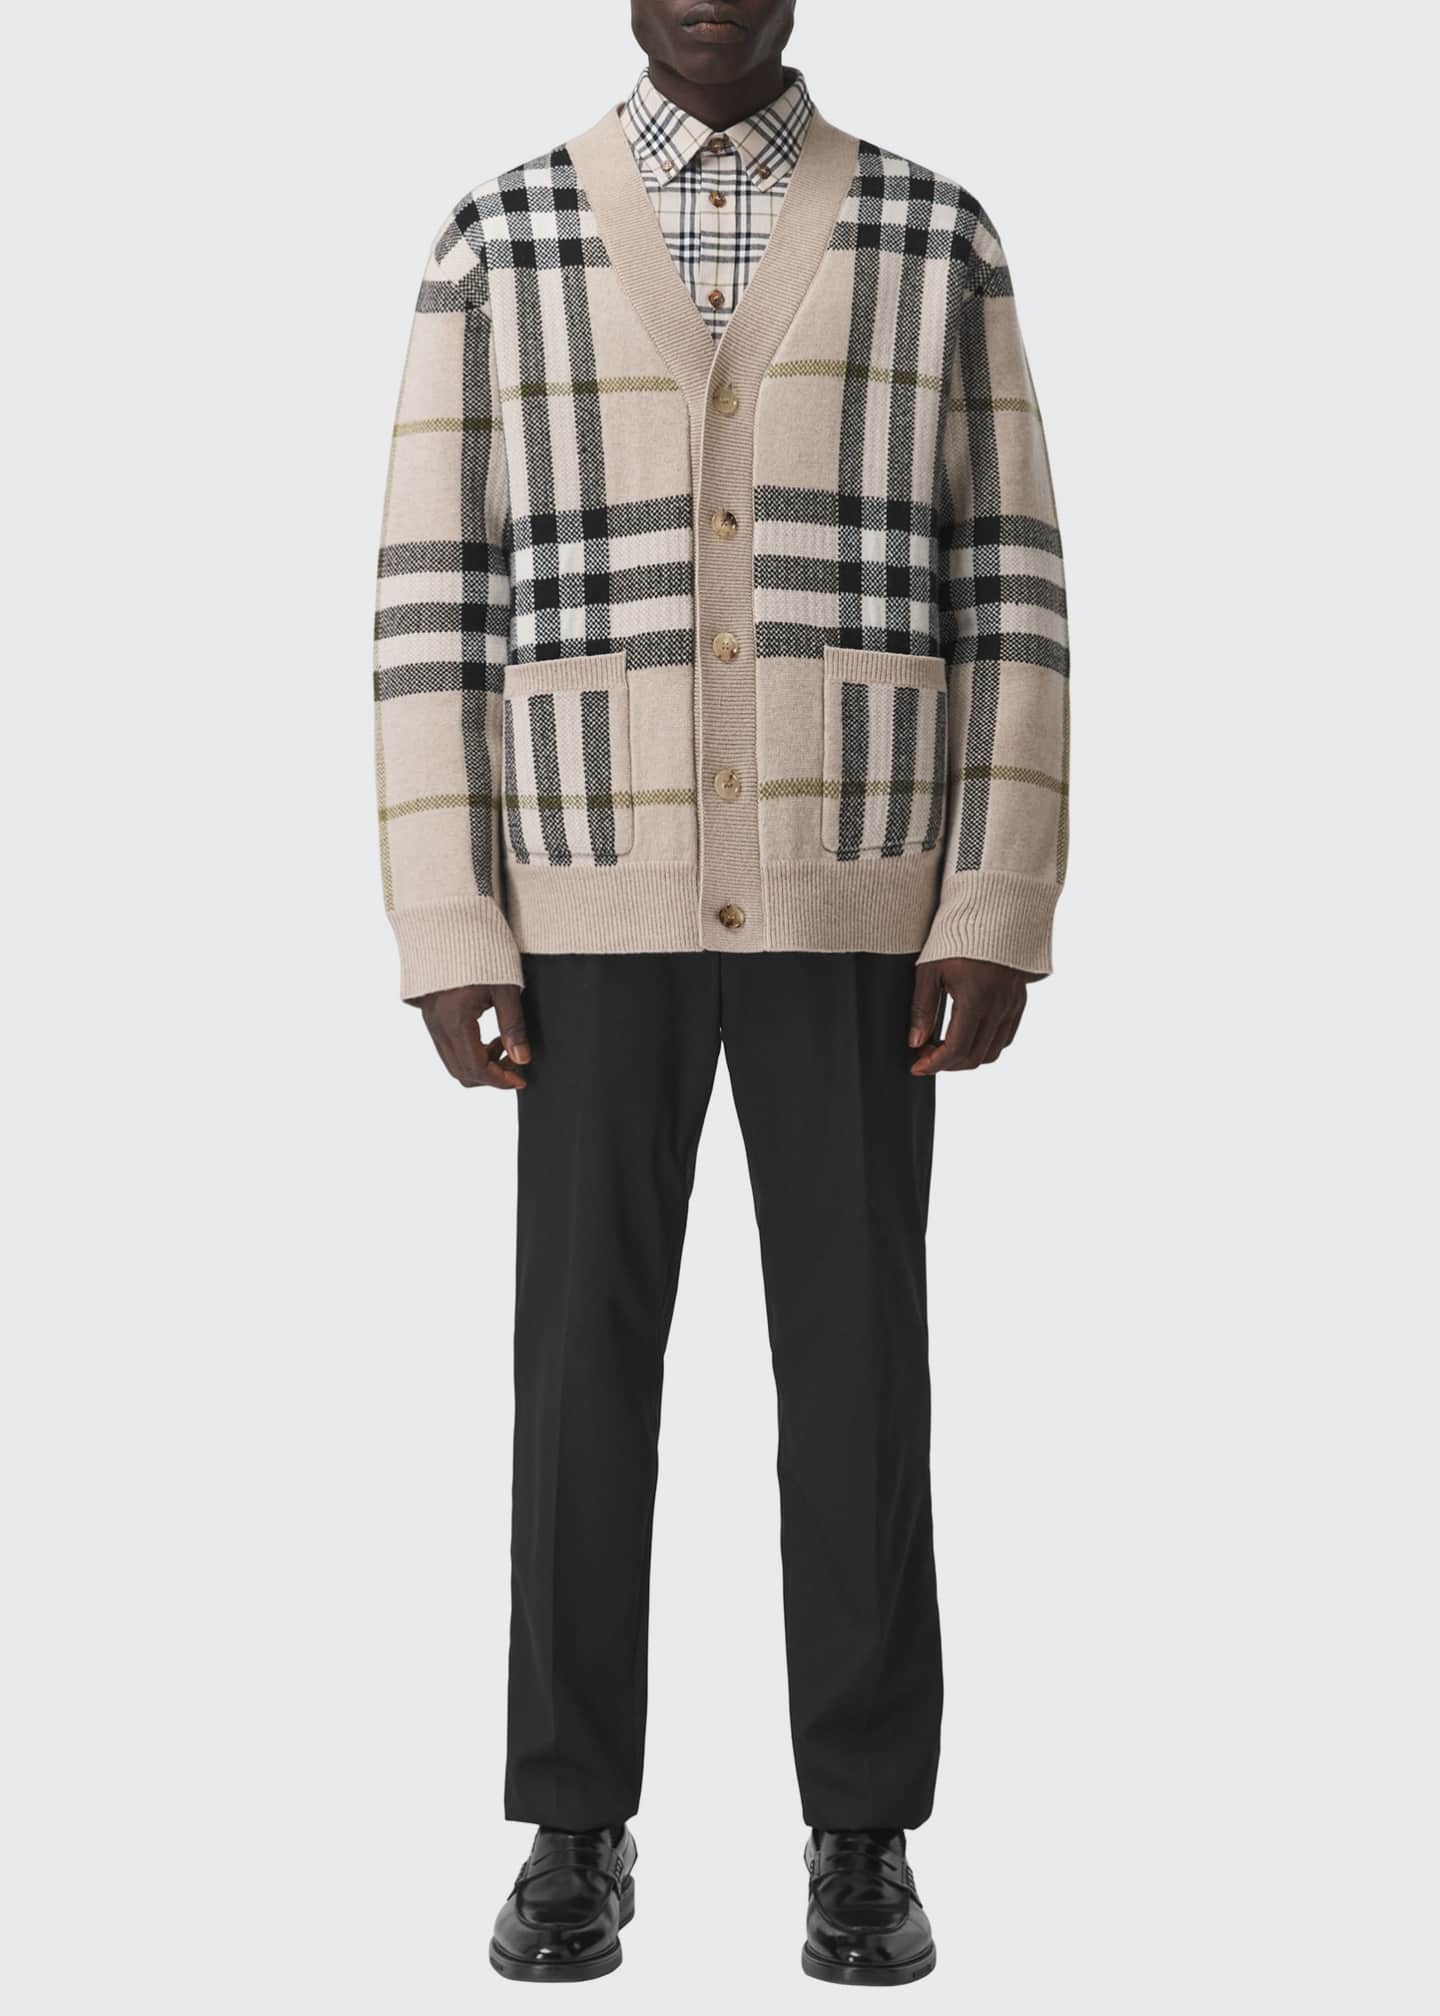 Burberry Men's Large Check Wool-Cashmere Cardigan Sweater - Bergdorf ...